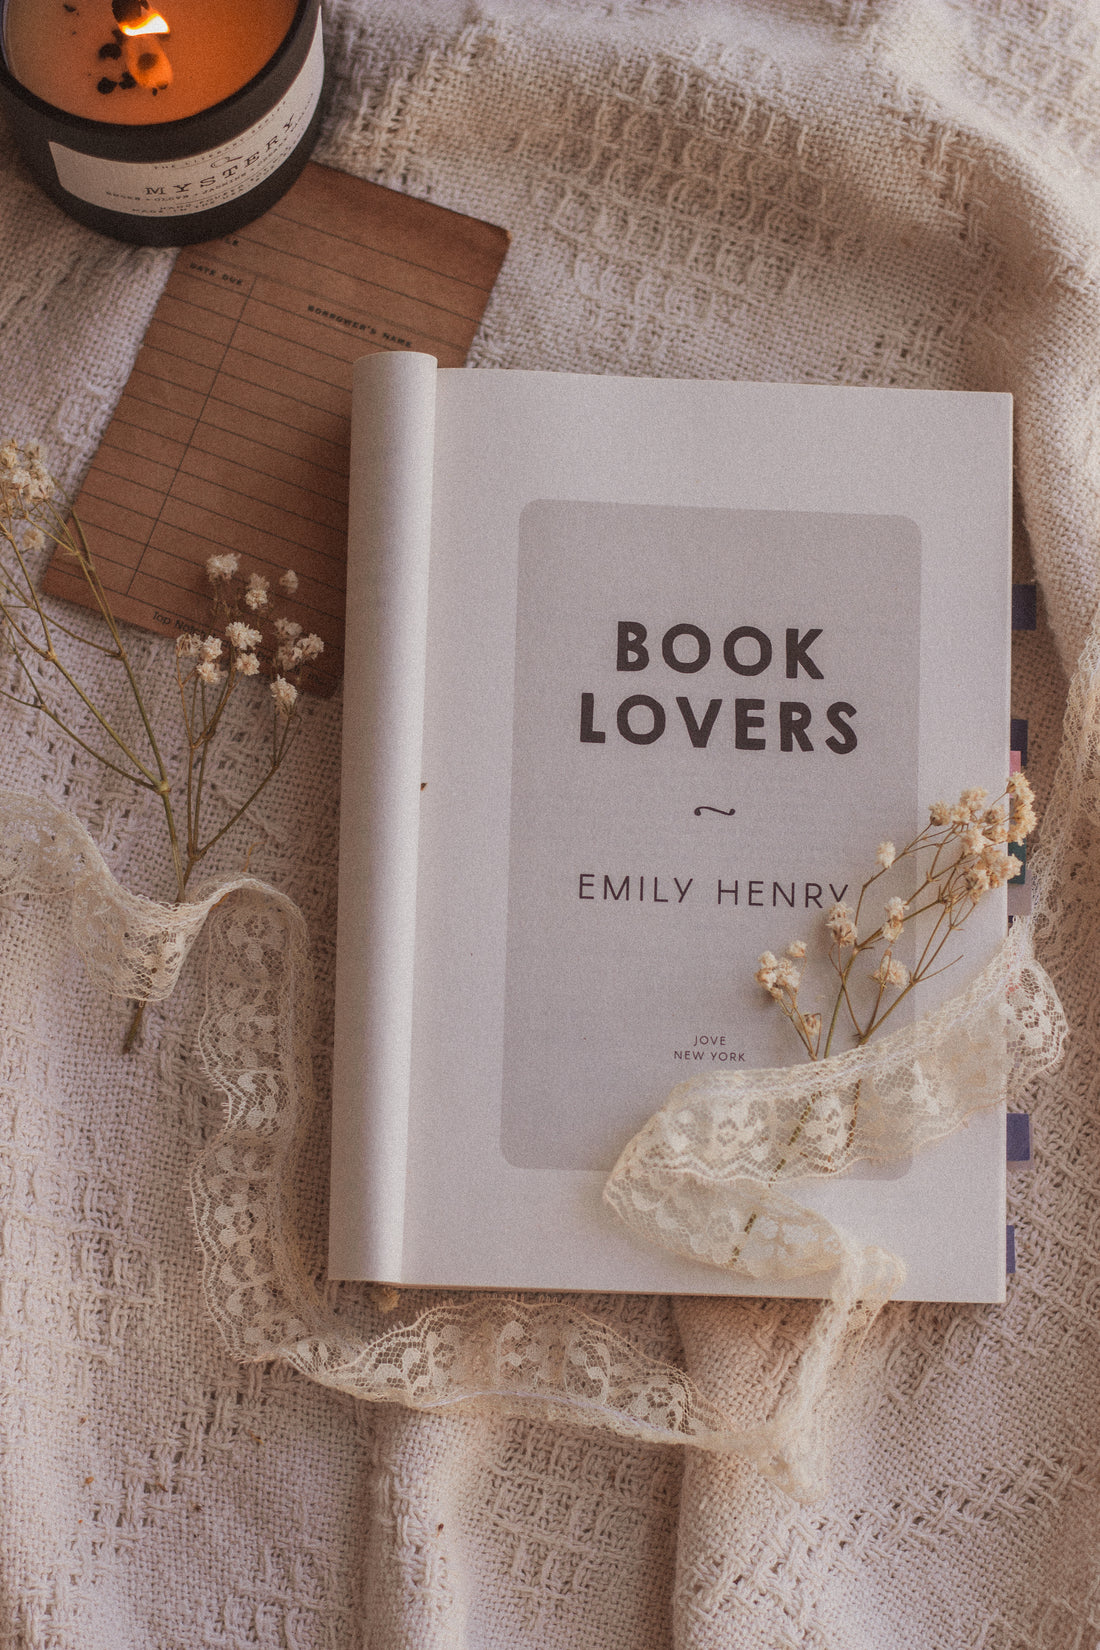 Book Lovers by Emily Henry (⭐⭐⭐⭐⭐)